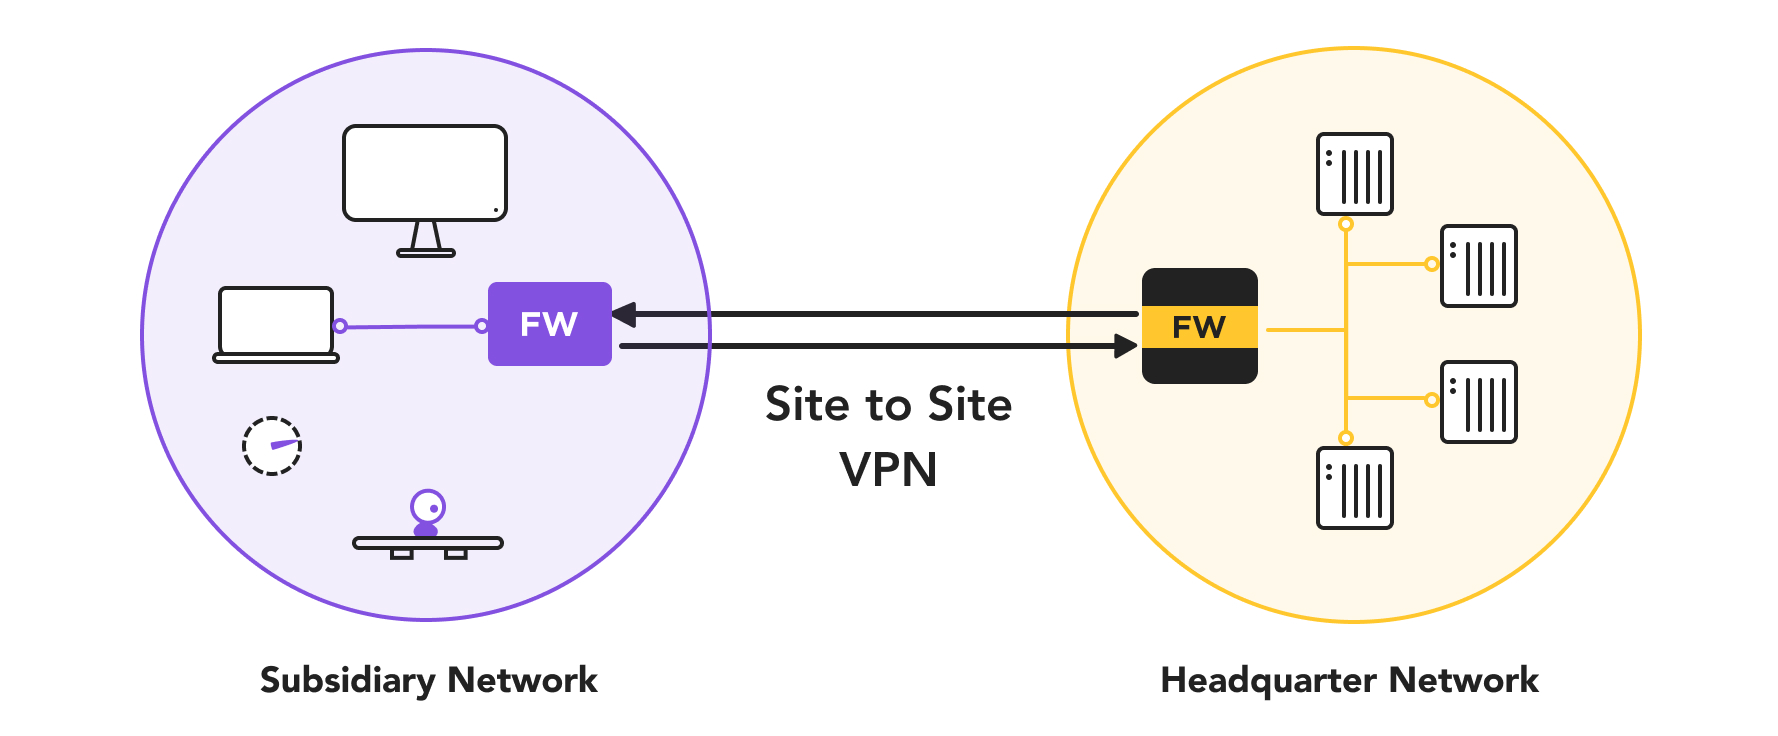 Firewalla Purple connected through Site-to-Site VPN to Firewalla Gold's Headquarters Network